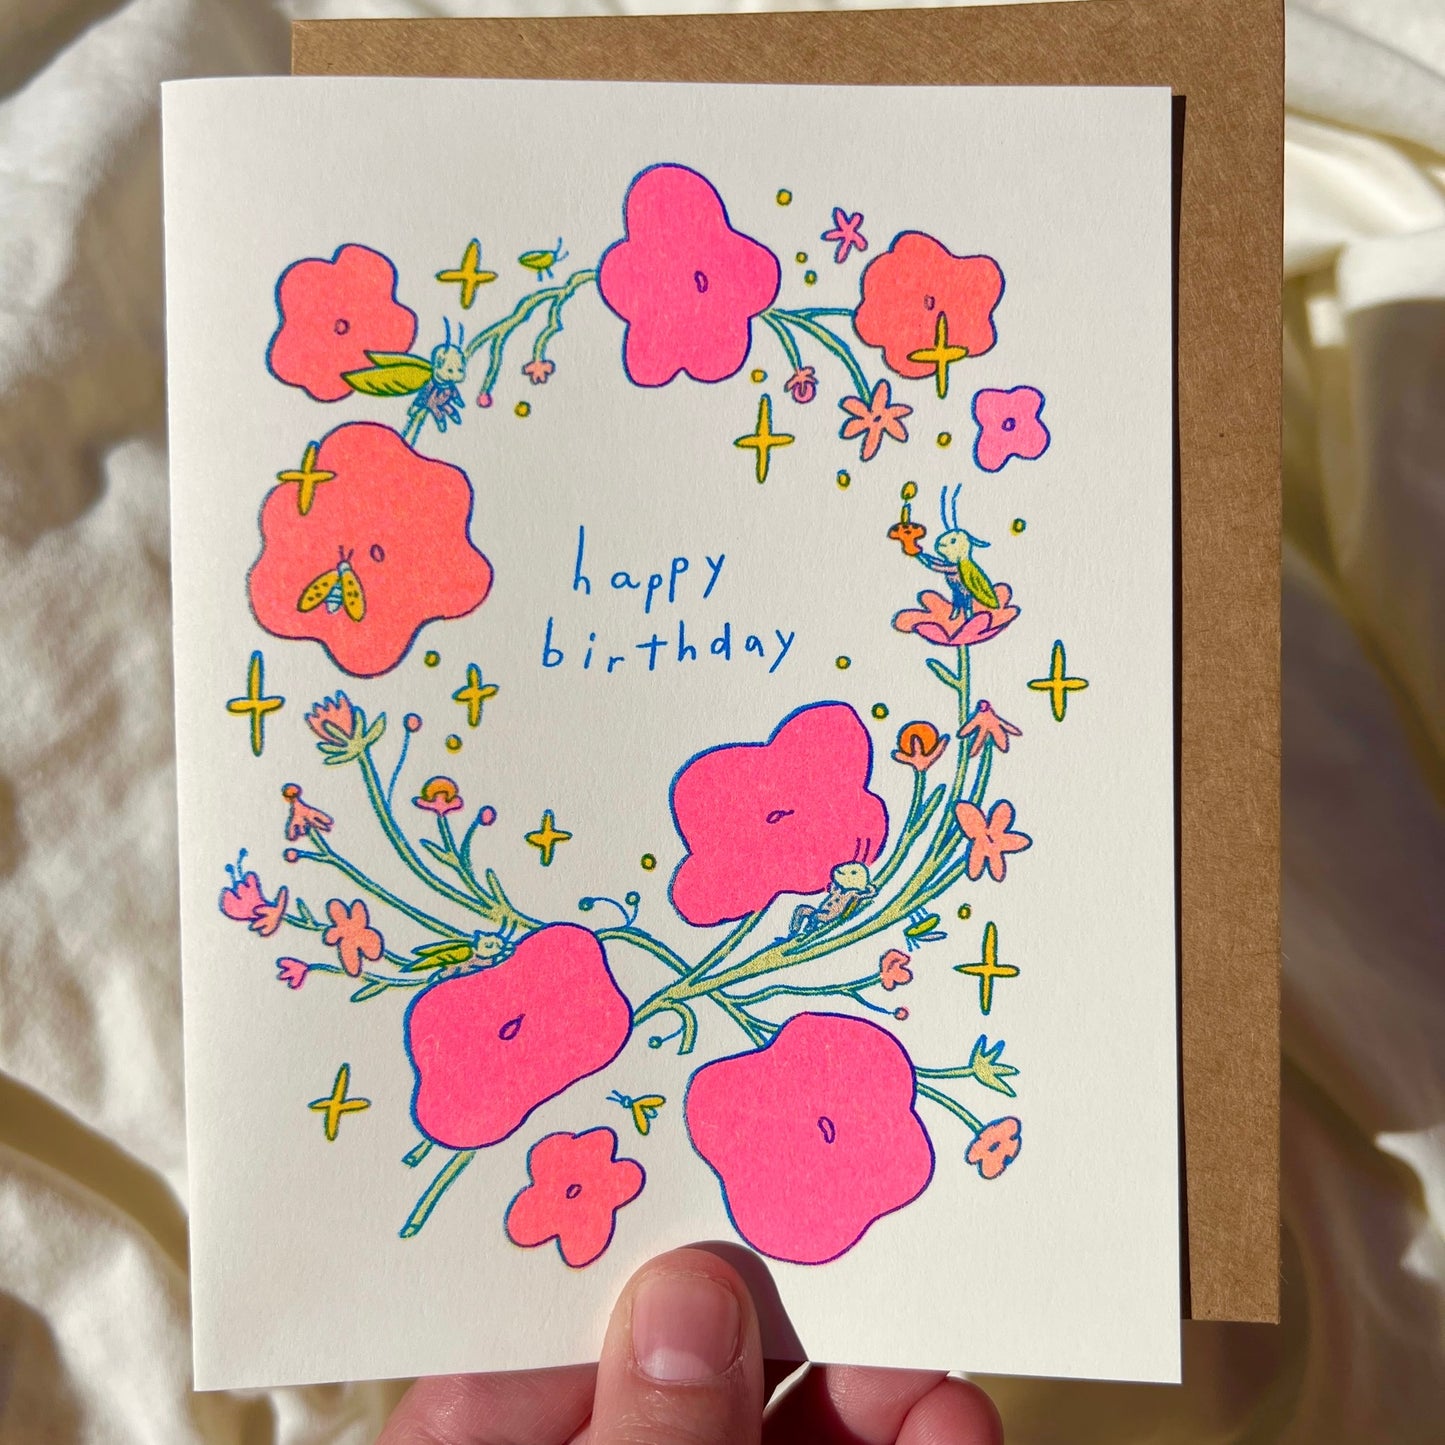 Natalie Andrewson: Greeting Cards